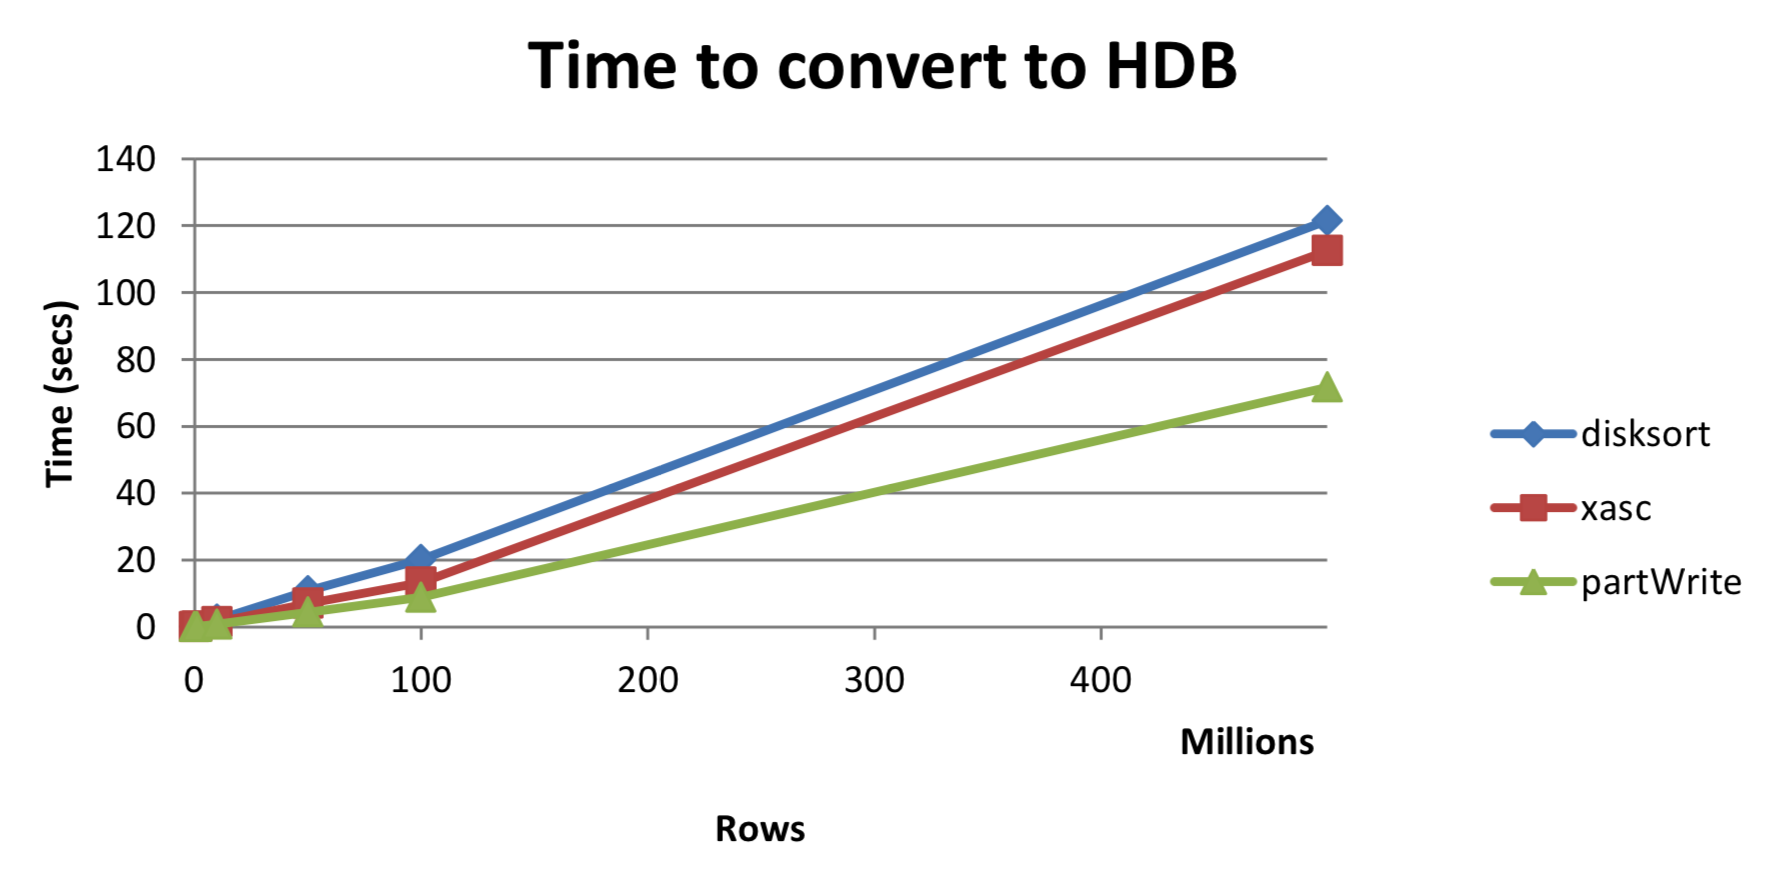 Figure 2: Time to convert to HDB